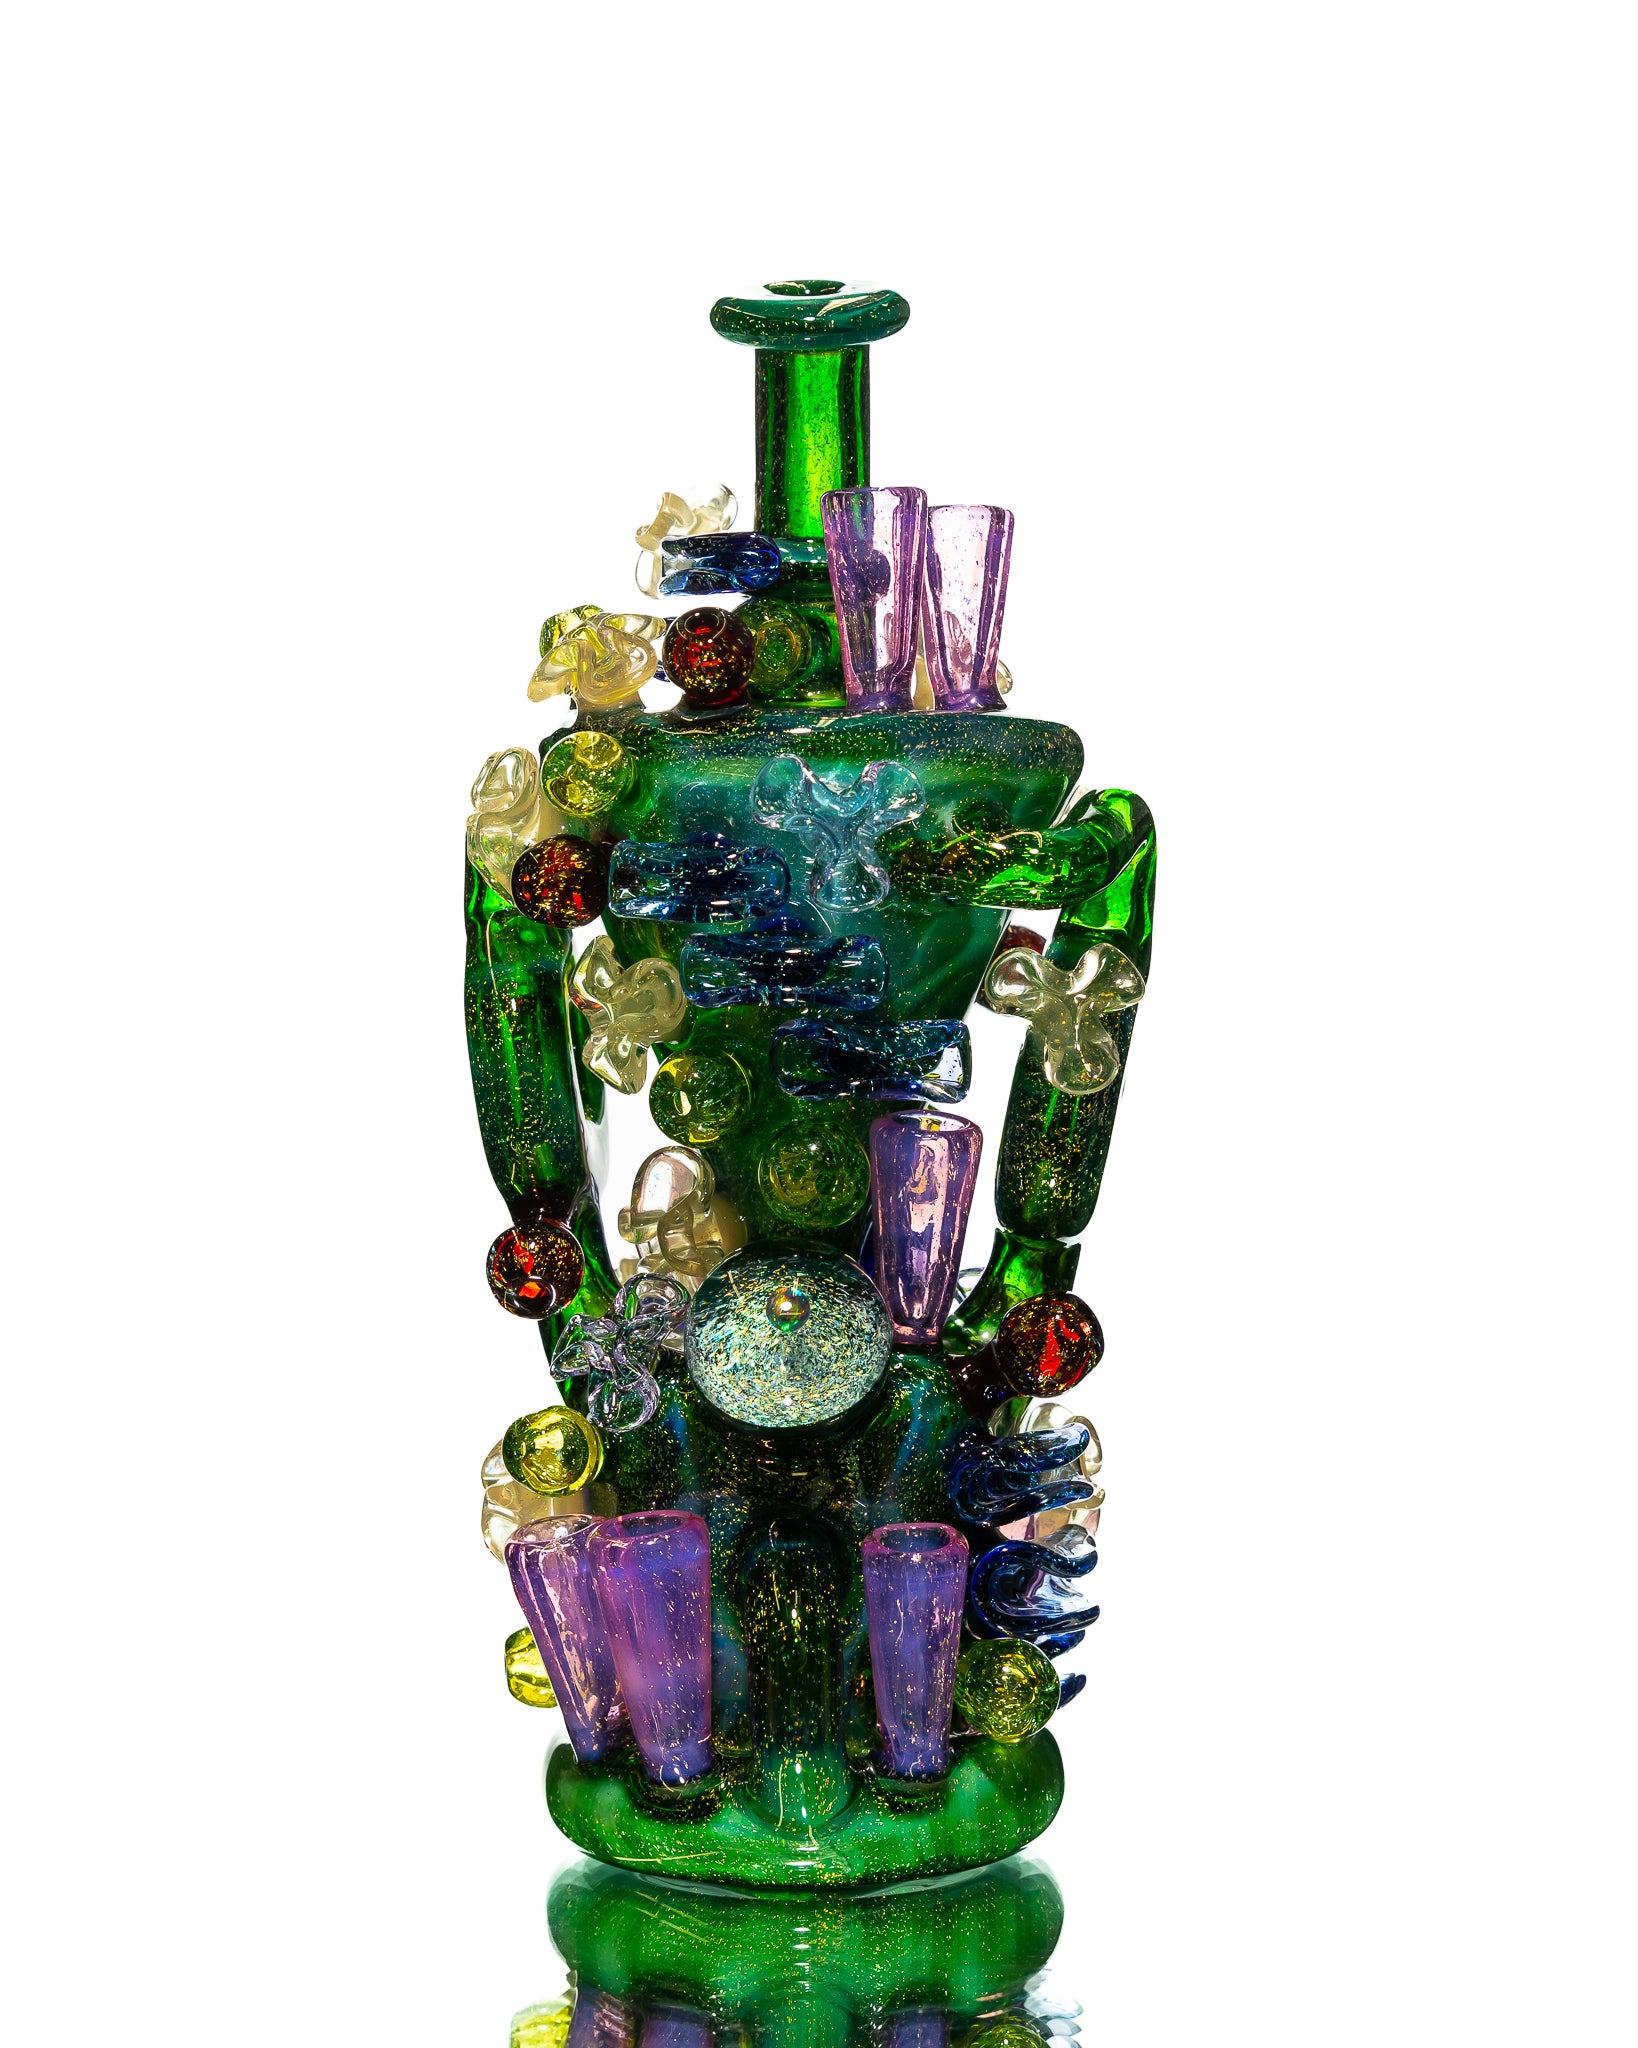 W.C. Stearns - Green Coral Recycler